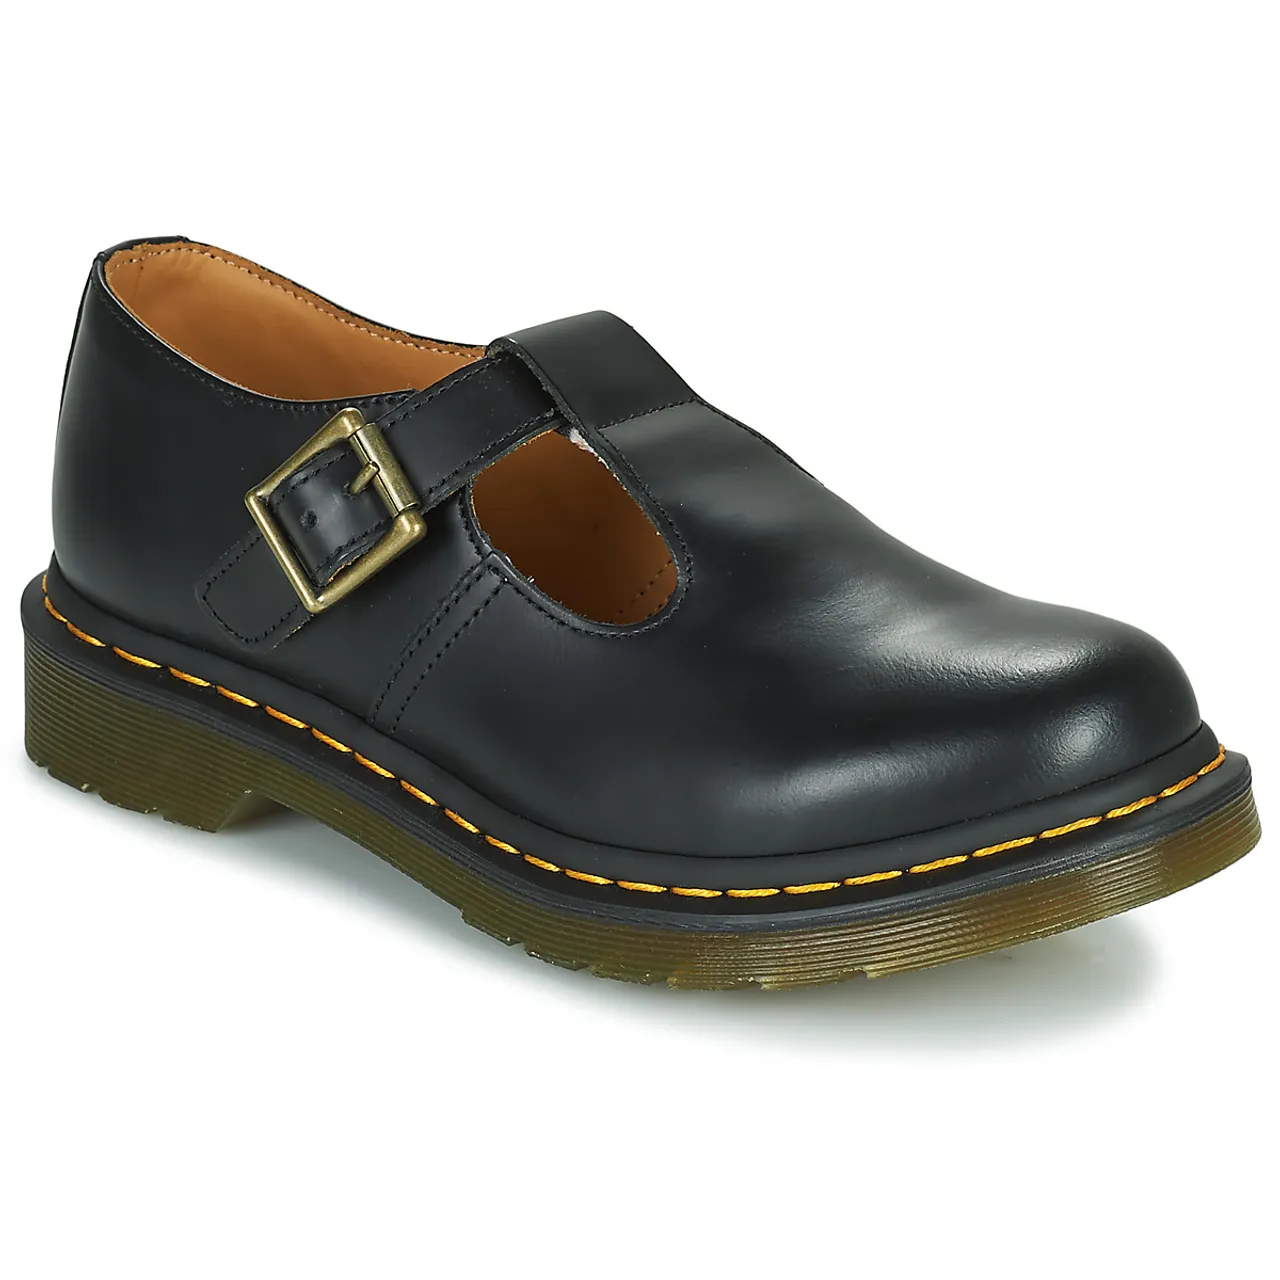 Dr. Martens  POLLEY  women's Casual Shoes in Black